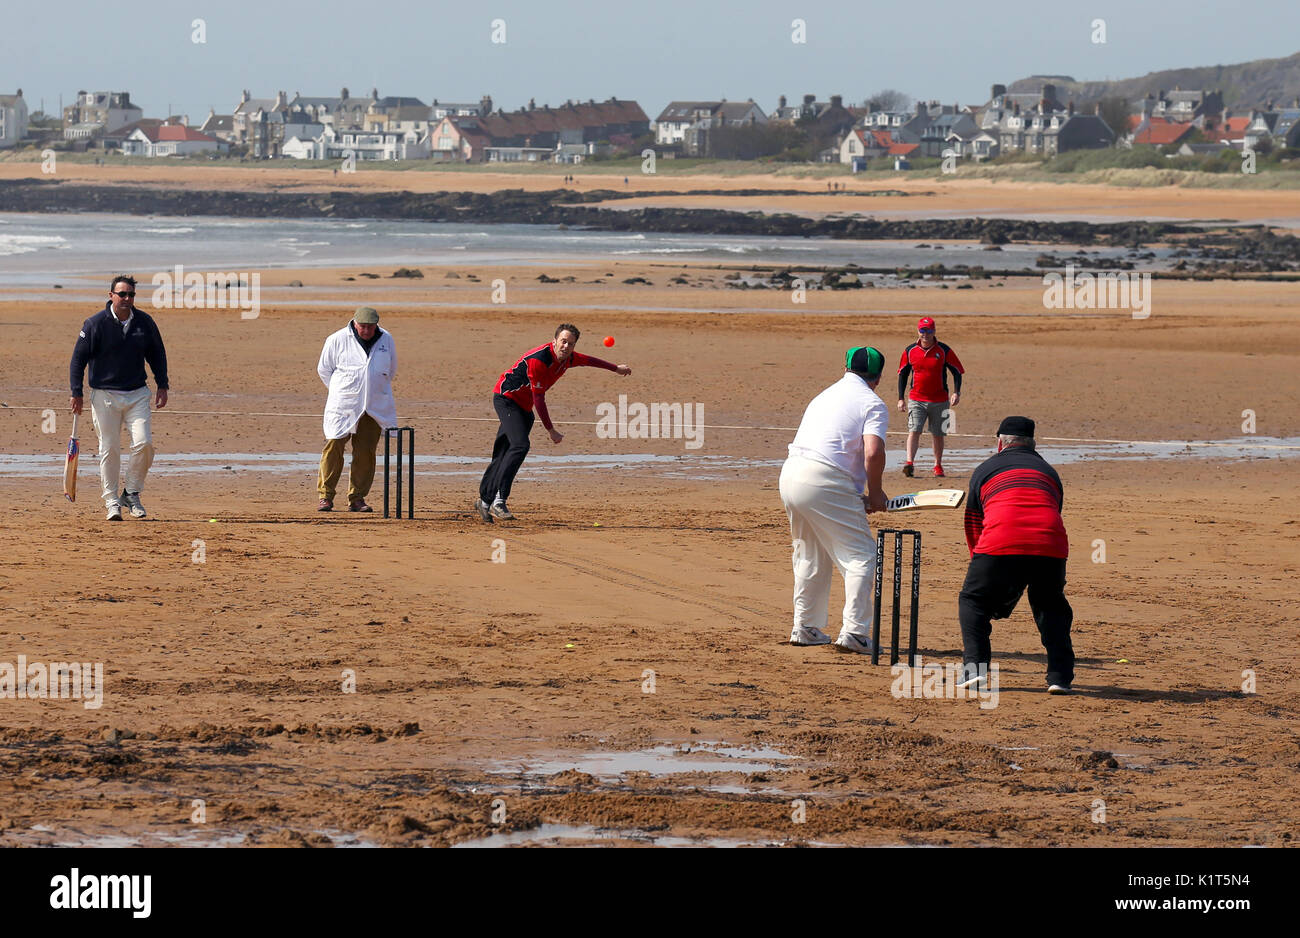 The Ship Inn Cricket Club play a home match against the Eccentric Flamingoes Cricket Club on Sunday April 30th, 2017, in front of the pub in Elie, Fife, which is the only one in Britain to have a cricket team with a pitch on the beach. The Ship Inn Cricket Club season runs from May to September with dates of matches dependent on the tides. Any Batsman who hits a six which lands in the Ship Inn beer garden wins their height in beer and any spectator who catches a six in the beer garden also wins their height in beer. Stock Photo